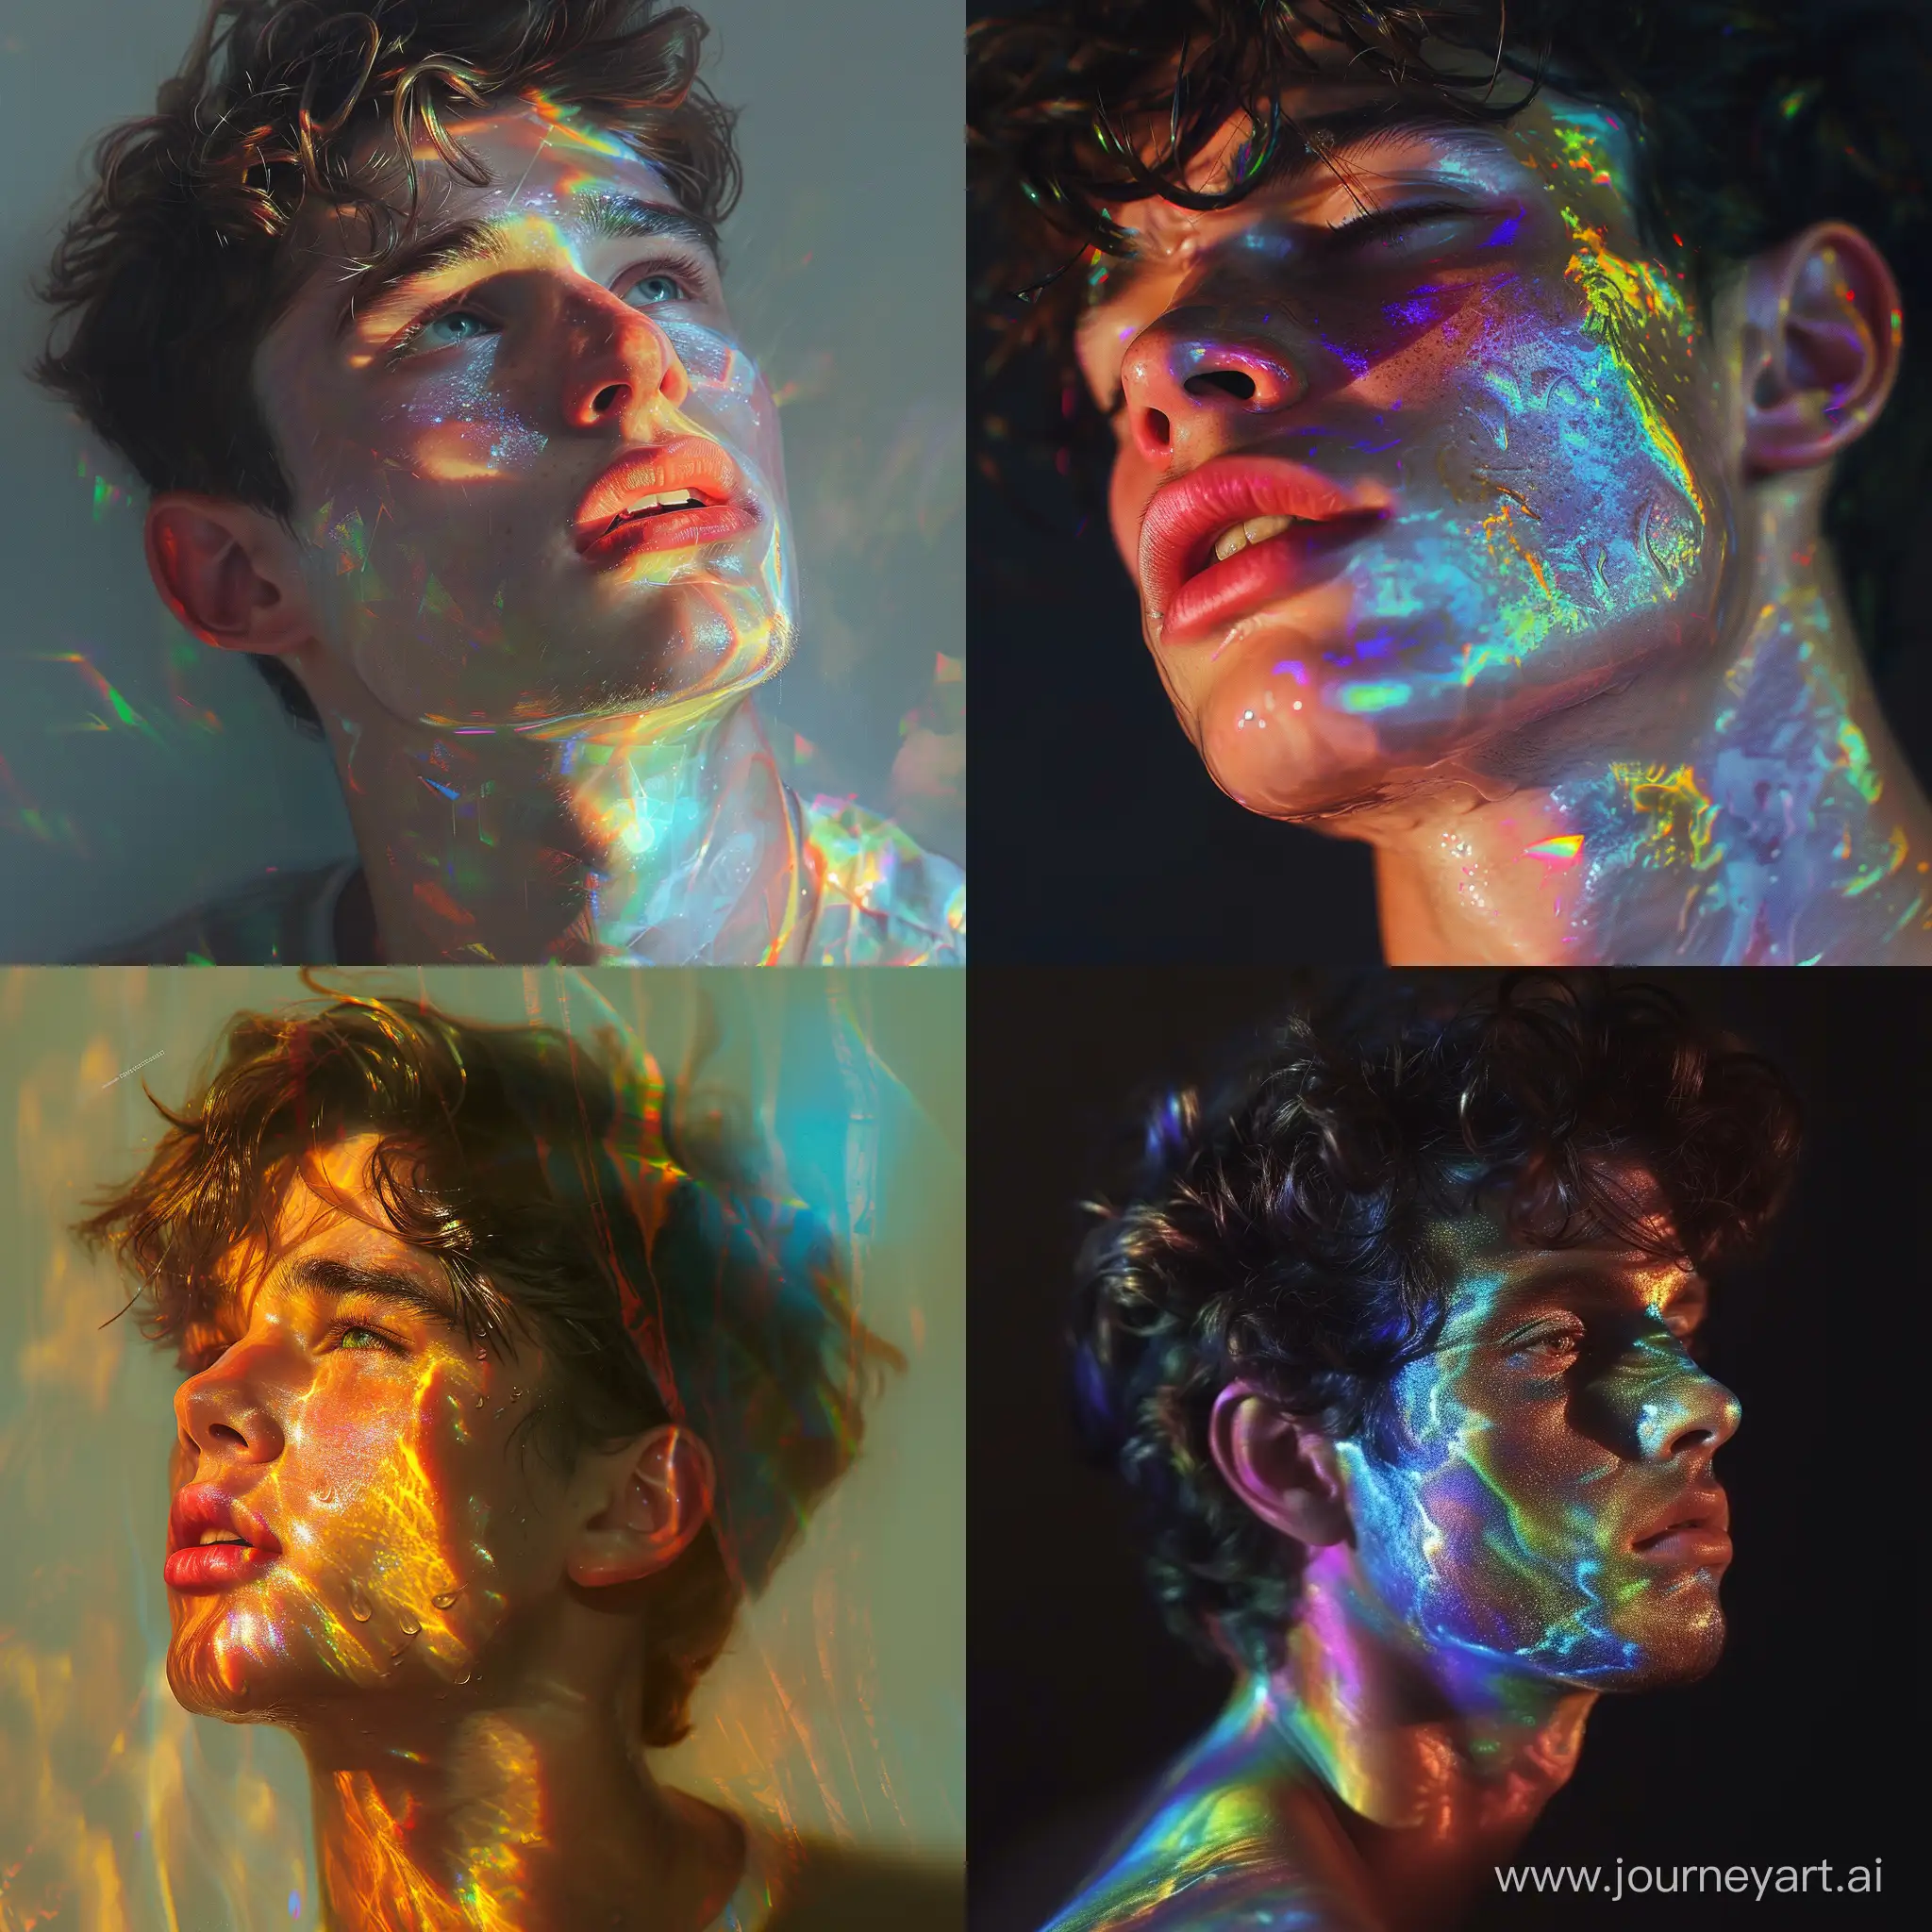 Hyperrealistic-Baroque-Portrait-of-a-20YearOld-Guy-with-Phantasmal-Iridescent-Features